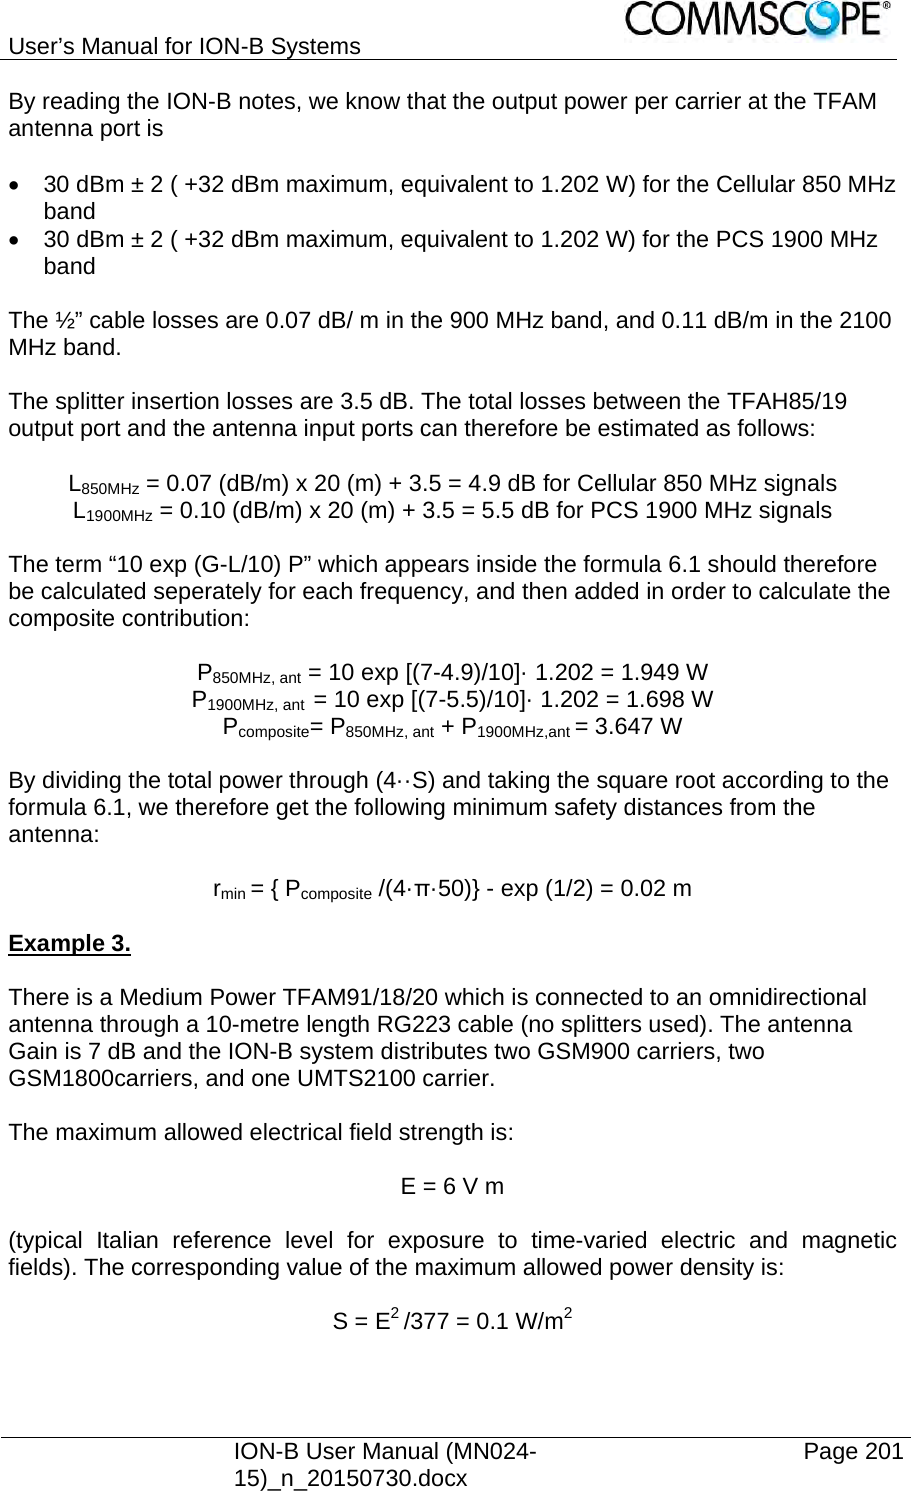 User’s Manual for ION-B Systems    ION-B User Manual (MN024-15)_n_20150730.docx  Page 201 By reading the ION-B notes, we know that the output power per carrier at the TFAM antenna port is    30 dBm ± 2 ( +32 dBm maximum, equivalent to 1.202 W) for the Cellular 850 MHz band   30 dBm ± 2 ( +32 dBm maximum, equivalent to 1.202 W) for the PCS 1900 MHz band  The ½” cable losses are 0.07 dB/ m in the 900 MHz band, and 0.11 dB/m in the 2100 MHz band.  The splitter insertion losses are 3.5 dB. The total losses between the TFAH85/19 output port and the antenna input ports can therefore be estimated as follows:  L850MHz = 0.07 (dB/m) x 20 (m) + 3.5 = 4.9 dB for Cellular 850 MHz signals L1900MHz = 0.10 (dB/m) x 20 (m) + 3.5 = 5.5 dB for PCS 1900 MHz signals  The term “10 exp (G-L/10) P” which appears inside the formula 6.1 should therefore be calculated seperately for each frequency, and then added in order to calculate the composite contribution:  P850MHz, ant = 10 exp [(7-4.9)/10]· 1.202 = 1.949 W P1900MHz, ant  = 10 exp [(7-5.5)/10]· 1.202 = 1.698 W Pcomposite= P850MHz, ant + P1900MHz,ant = 3.647 W  By dividing the total power through (4··S) and taking the square root according to the formula 6.1, we therefore get the following minimum safety distances from the antenna:  rmin = { Pcomposite /(4·π·50)} - exp (1/2) = 0.02 m  Example 3.   There is a Medium Power TFAM91/18/20 which is connected to an omnidirectional antenna through a 10-metre length RG223 cable (no splitters used). The antenna Gain is 7 dB and the ION-B system distributes two GSM900 carriers, two GSM1800carriers, and one UMTS2100 carrier.  The maximum allowed electrical field strength is:  E = 6 V m  (typical Italian reference level for exposure to time-varied electric and magnetic fields). The corresponding value of the maximum allowed power density is:  S = E2 /377 = 0.1 W/m2  